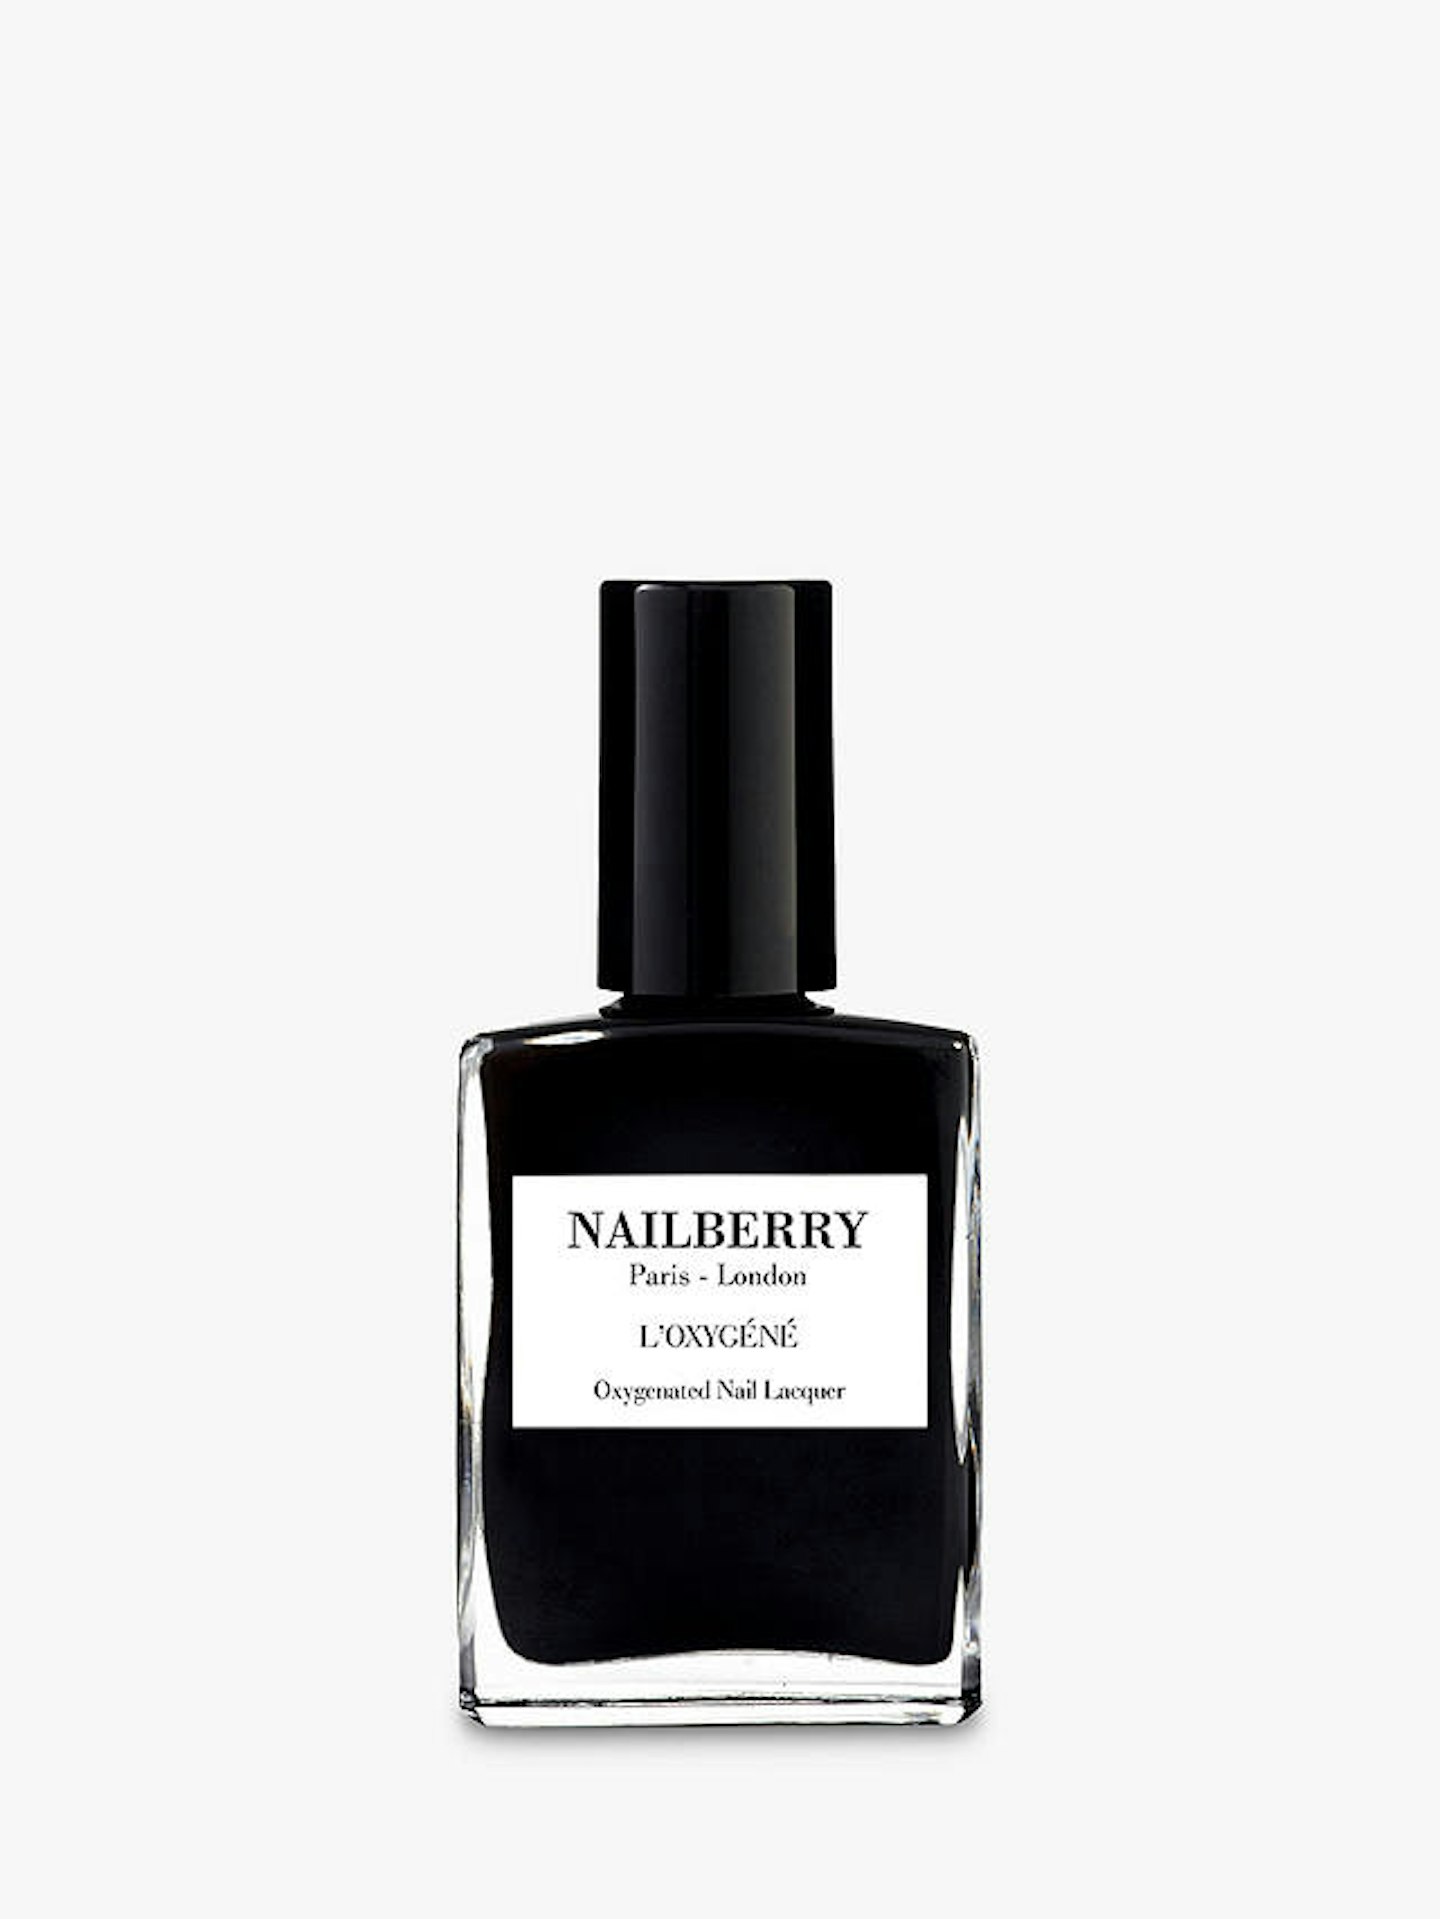 Nailberry L'Oxygéné Oxygenated Nail Lacquer in Blackberry